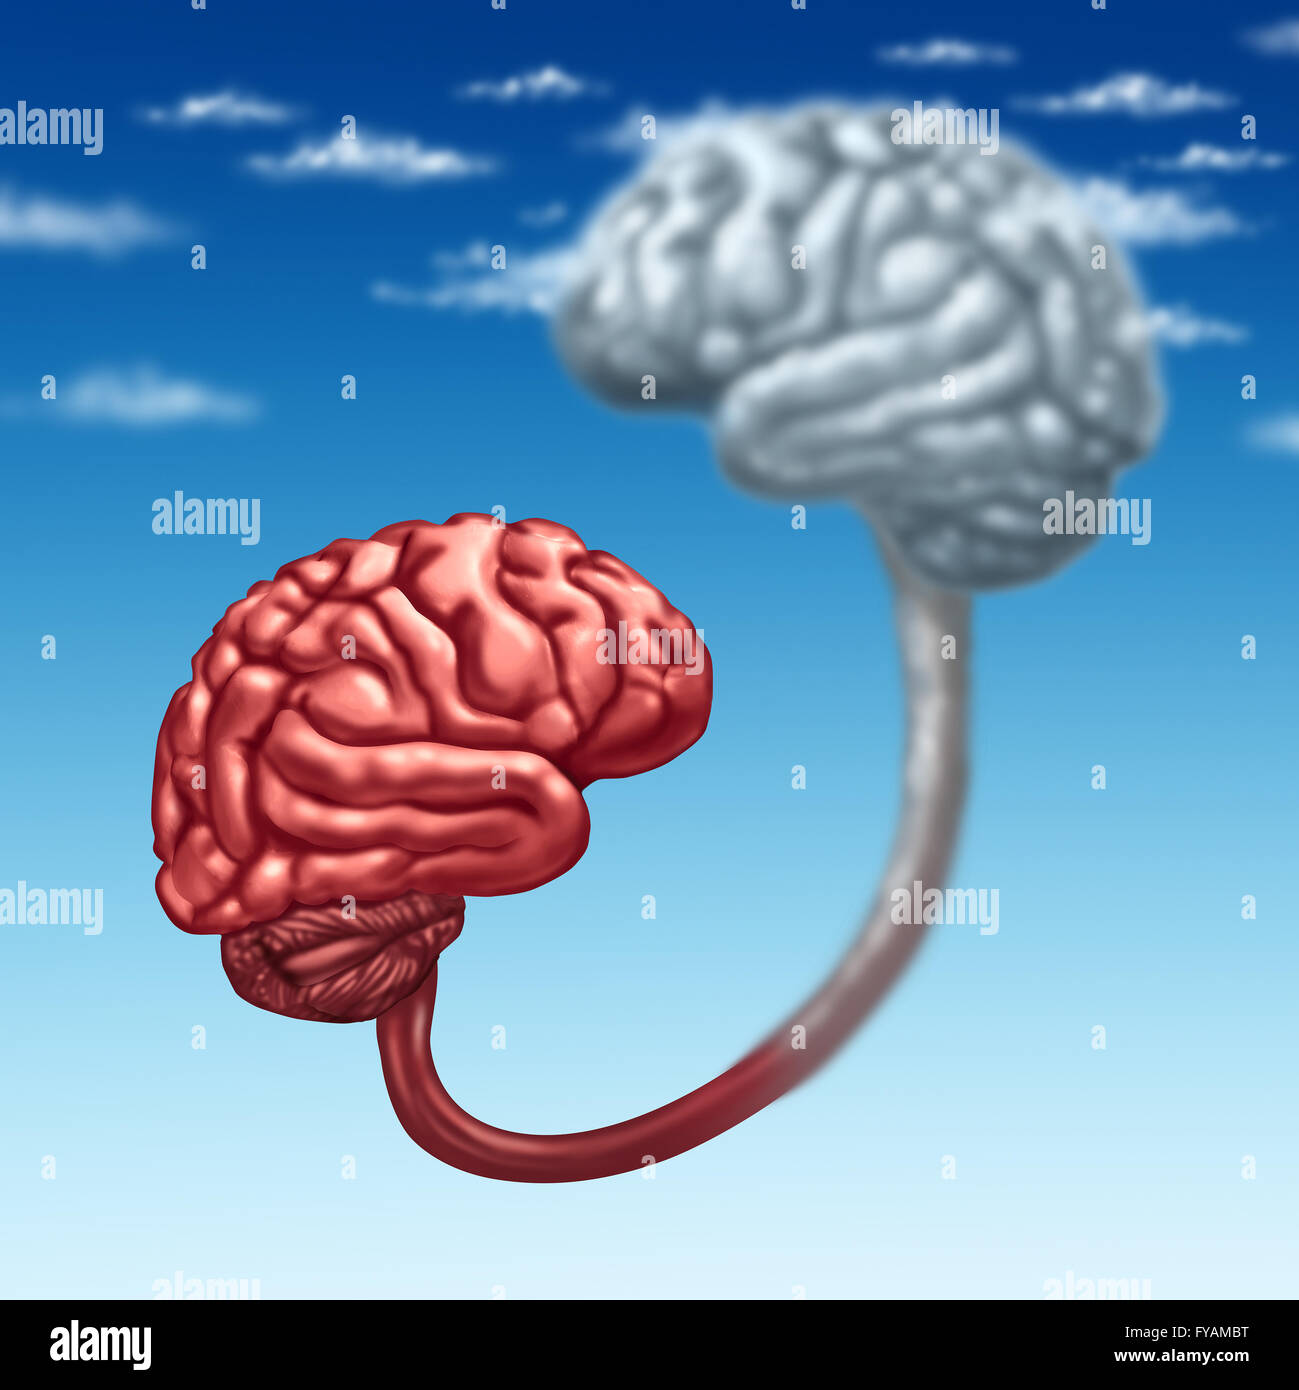 Upload to the cloud as a human organic mind uploaded to a virtual server in digital space as a futuristic technology concept and metaphor with a 3D illustration organ connected to a wireless database. Stock Photo